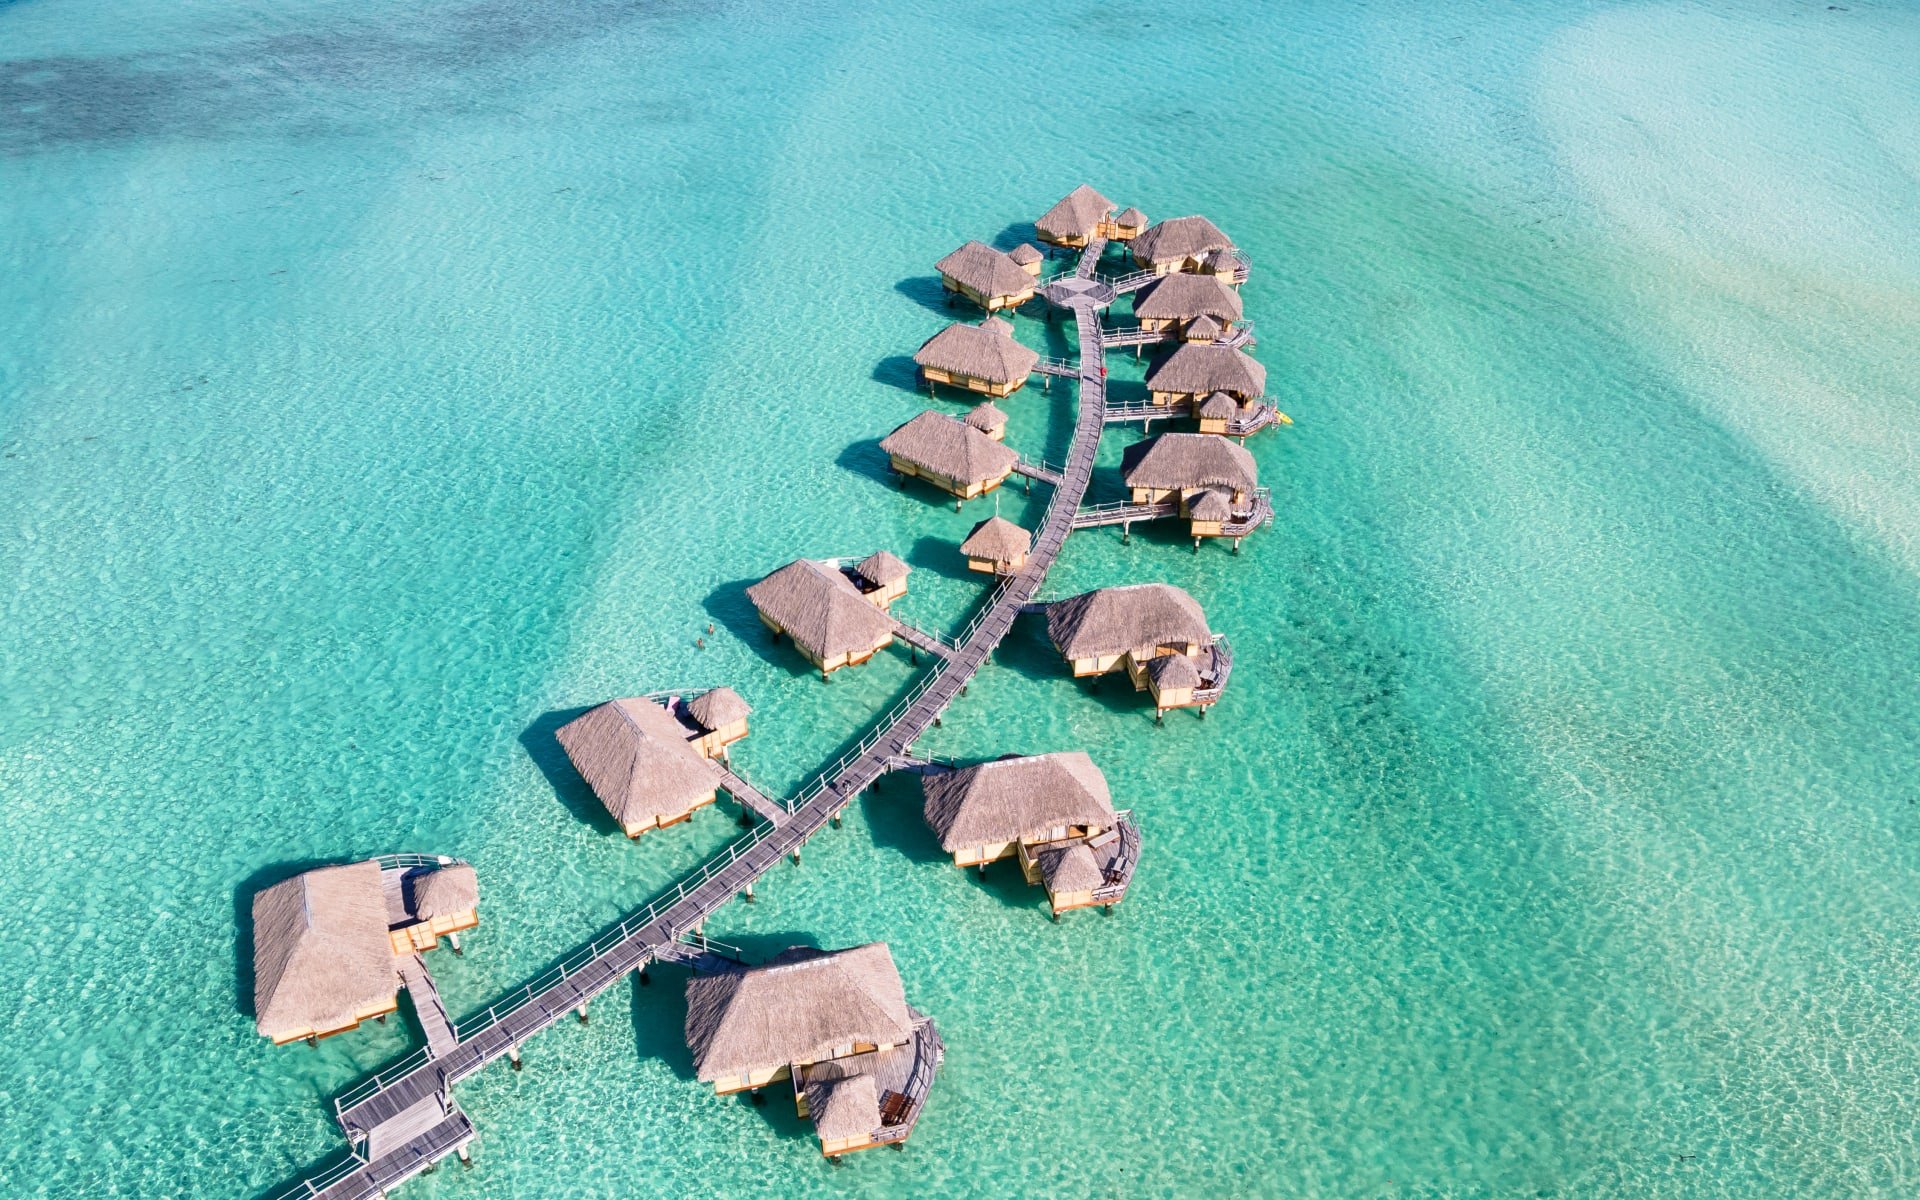 An aerial view of overwater villas that sit above a turquoise ocean.